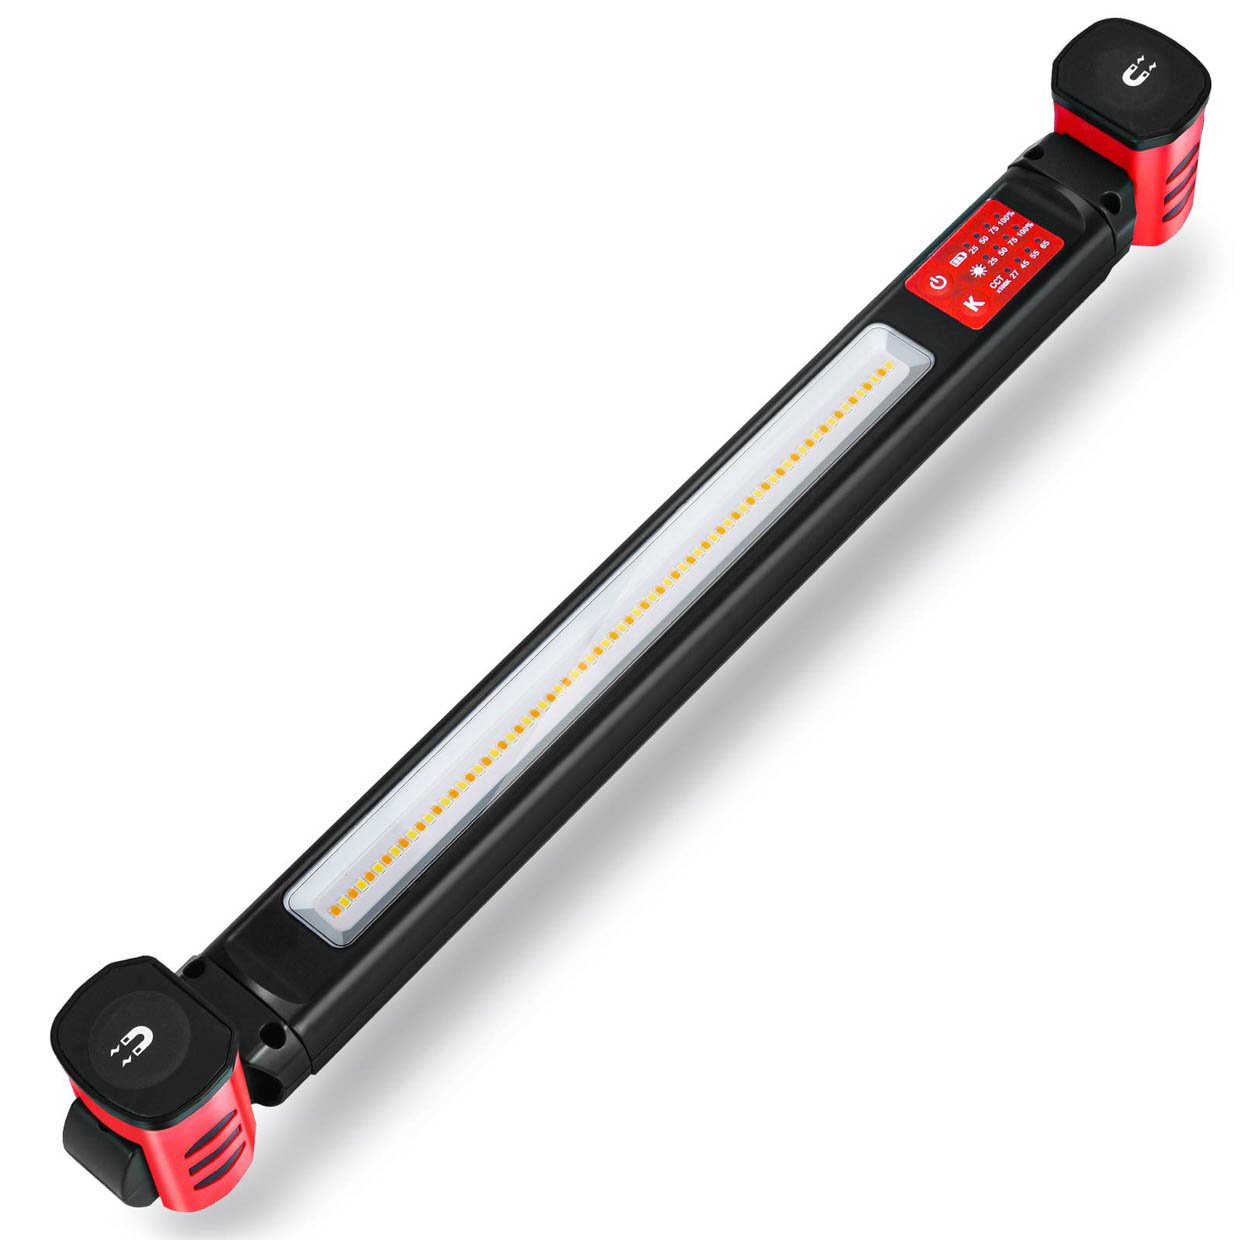 This Magnetic Work Light Is Ideal for Working Under Car